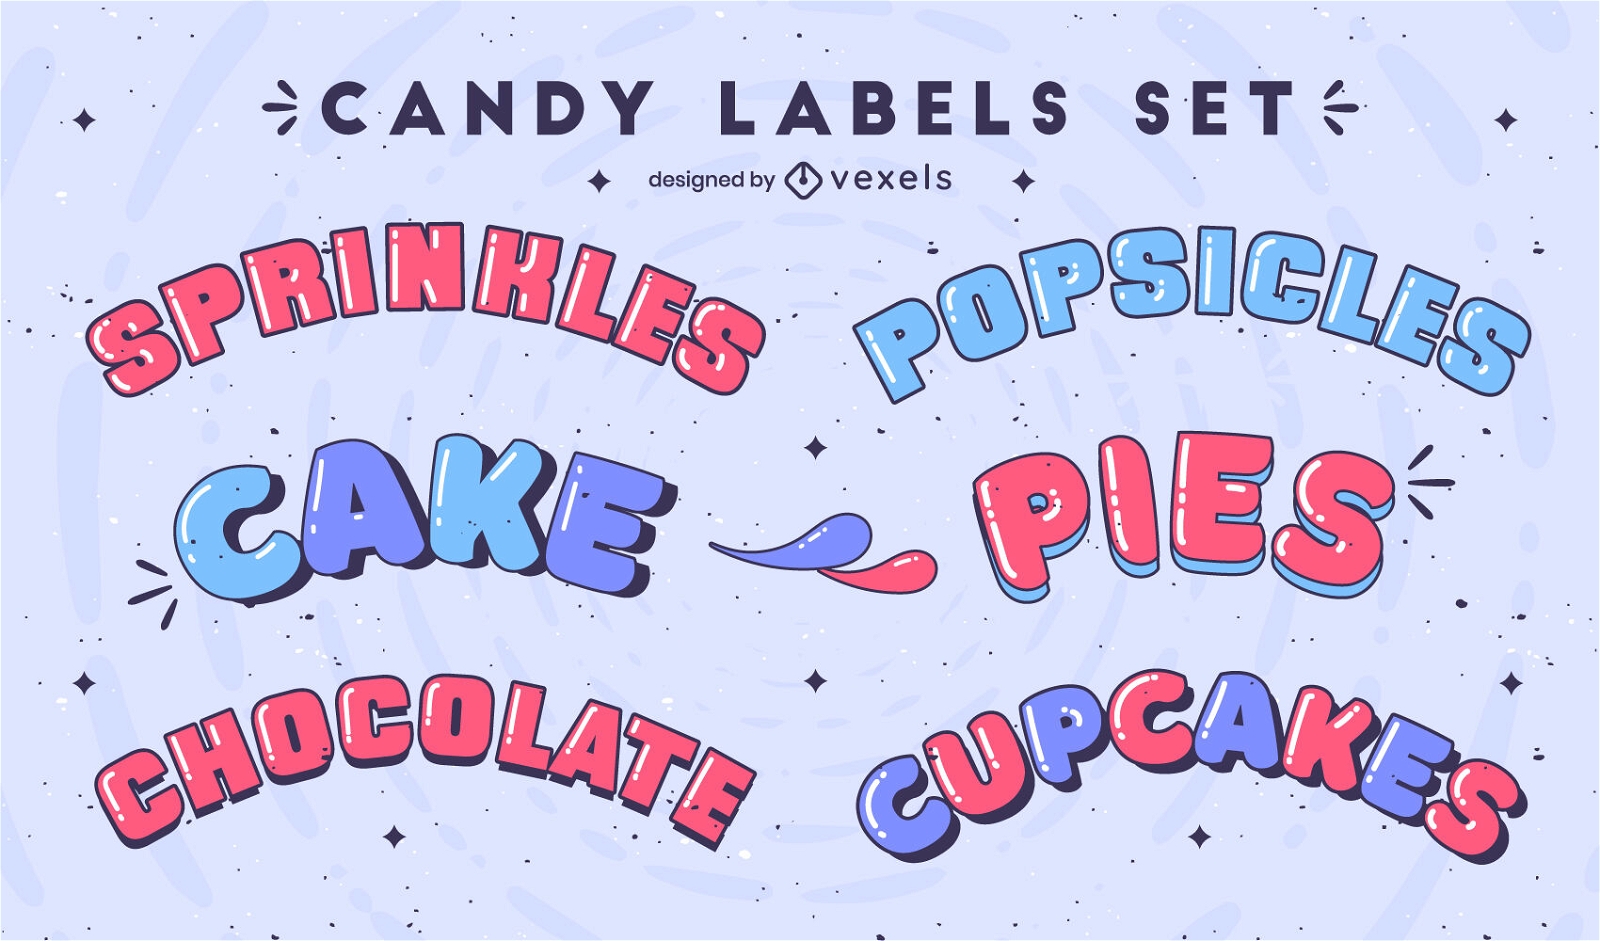 Glossy candy labels set